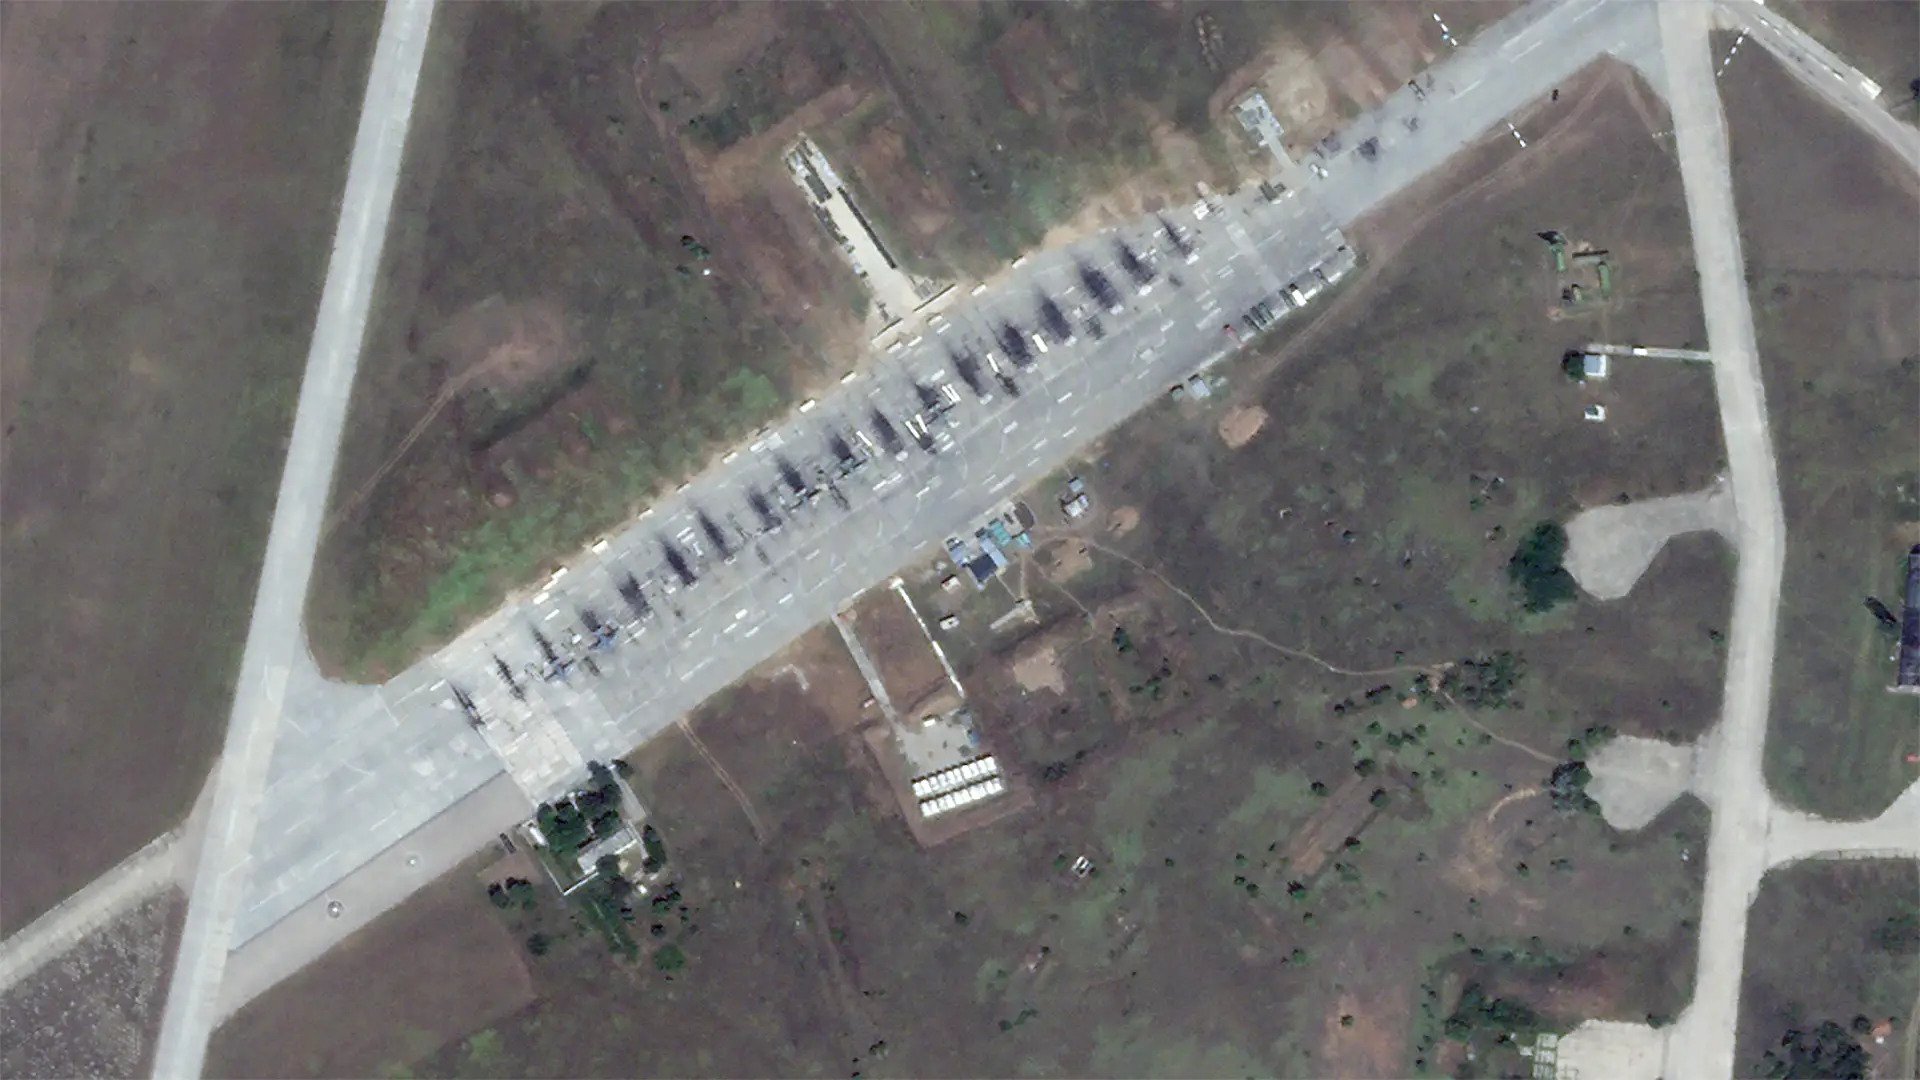 <em>A view of an apron at Russia’s Gvardeyskoe Air Base on the occupied Crimean Peninsula from a satellite image taken on August 17, 2022. PHOTO © 2022 PLANET LABS INC. ALL RIGHTS RESERVED. REPRINTED BY PERMISSION</em><br><br>